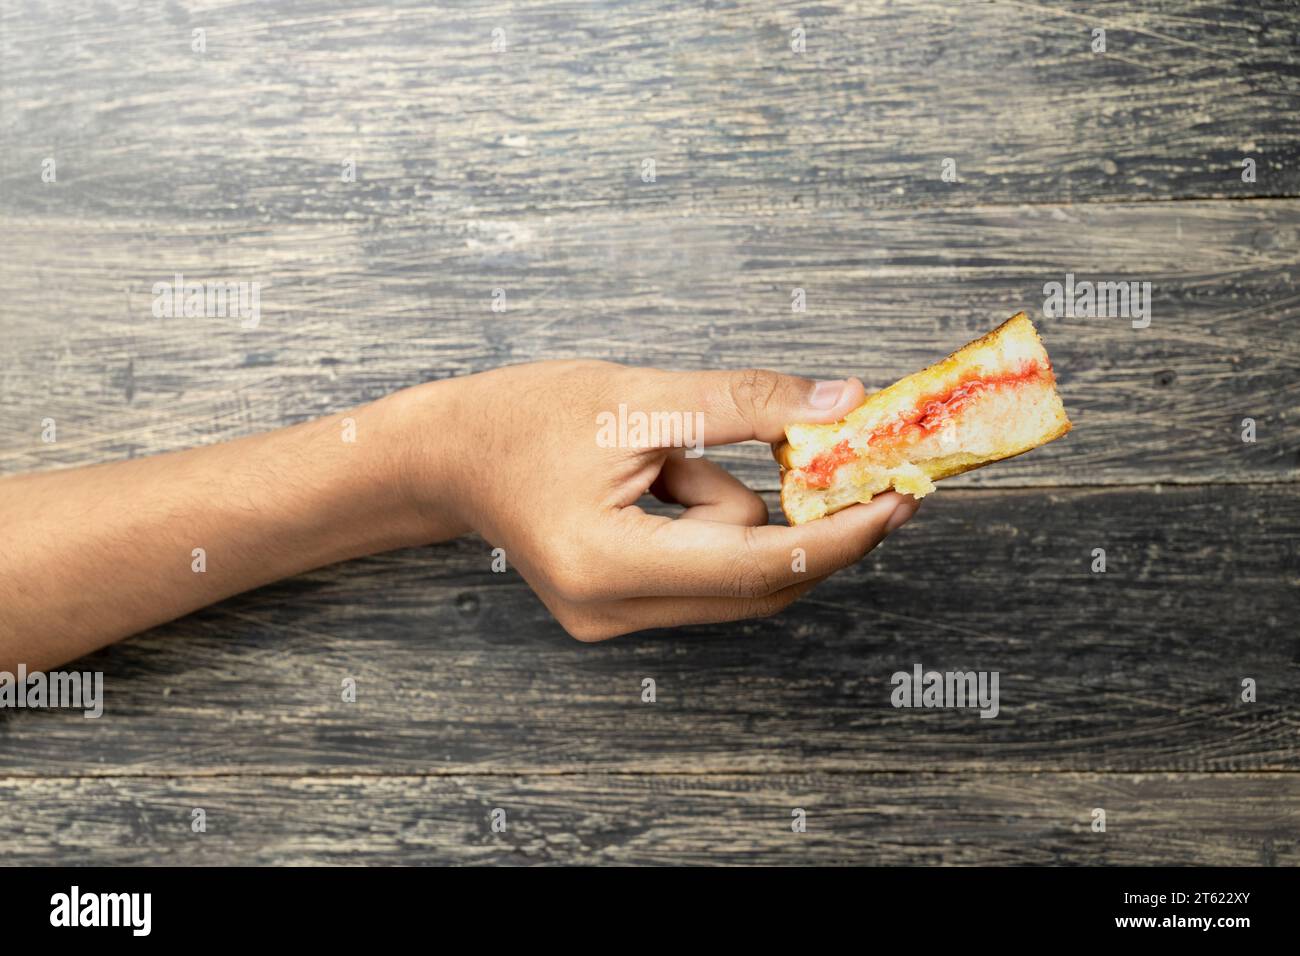 Human hand holding roasted bread (Roti Bakar) with strawberry jam. Traditional Indonesia food Stock Photo